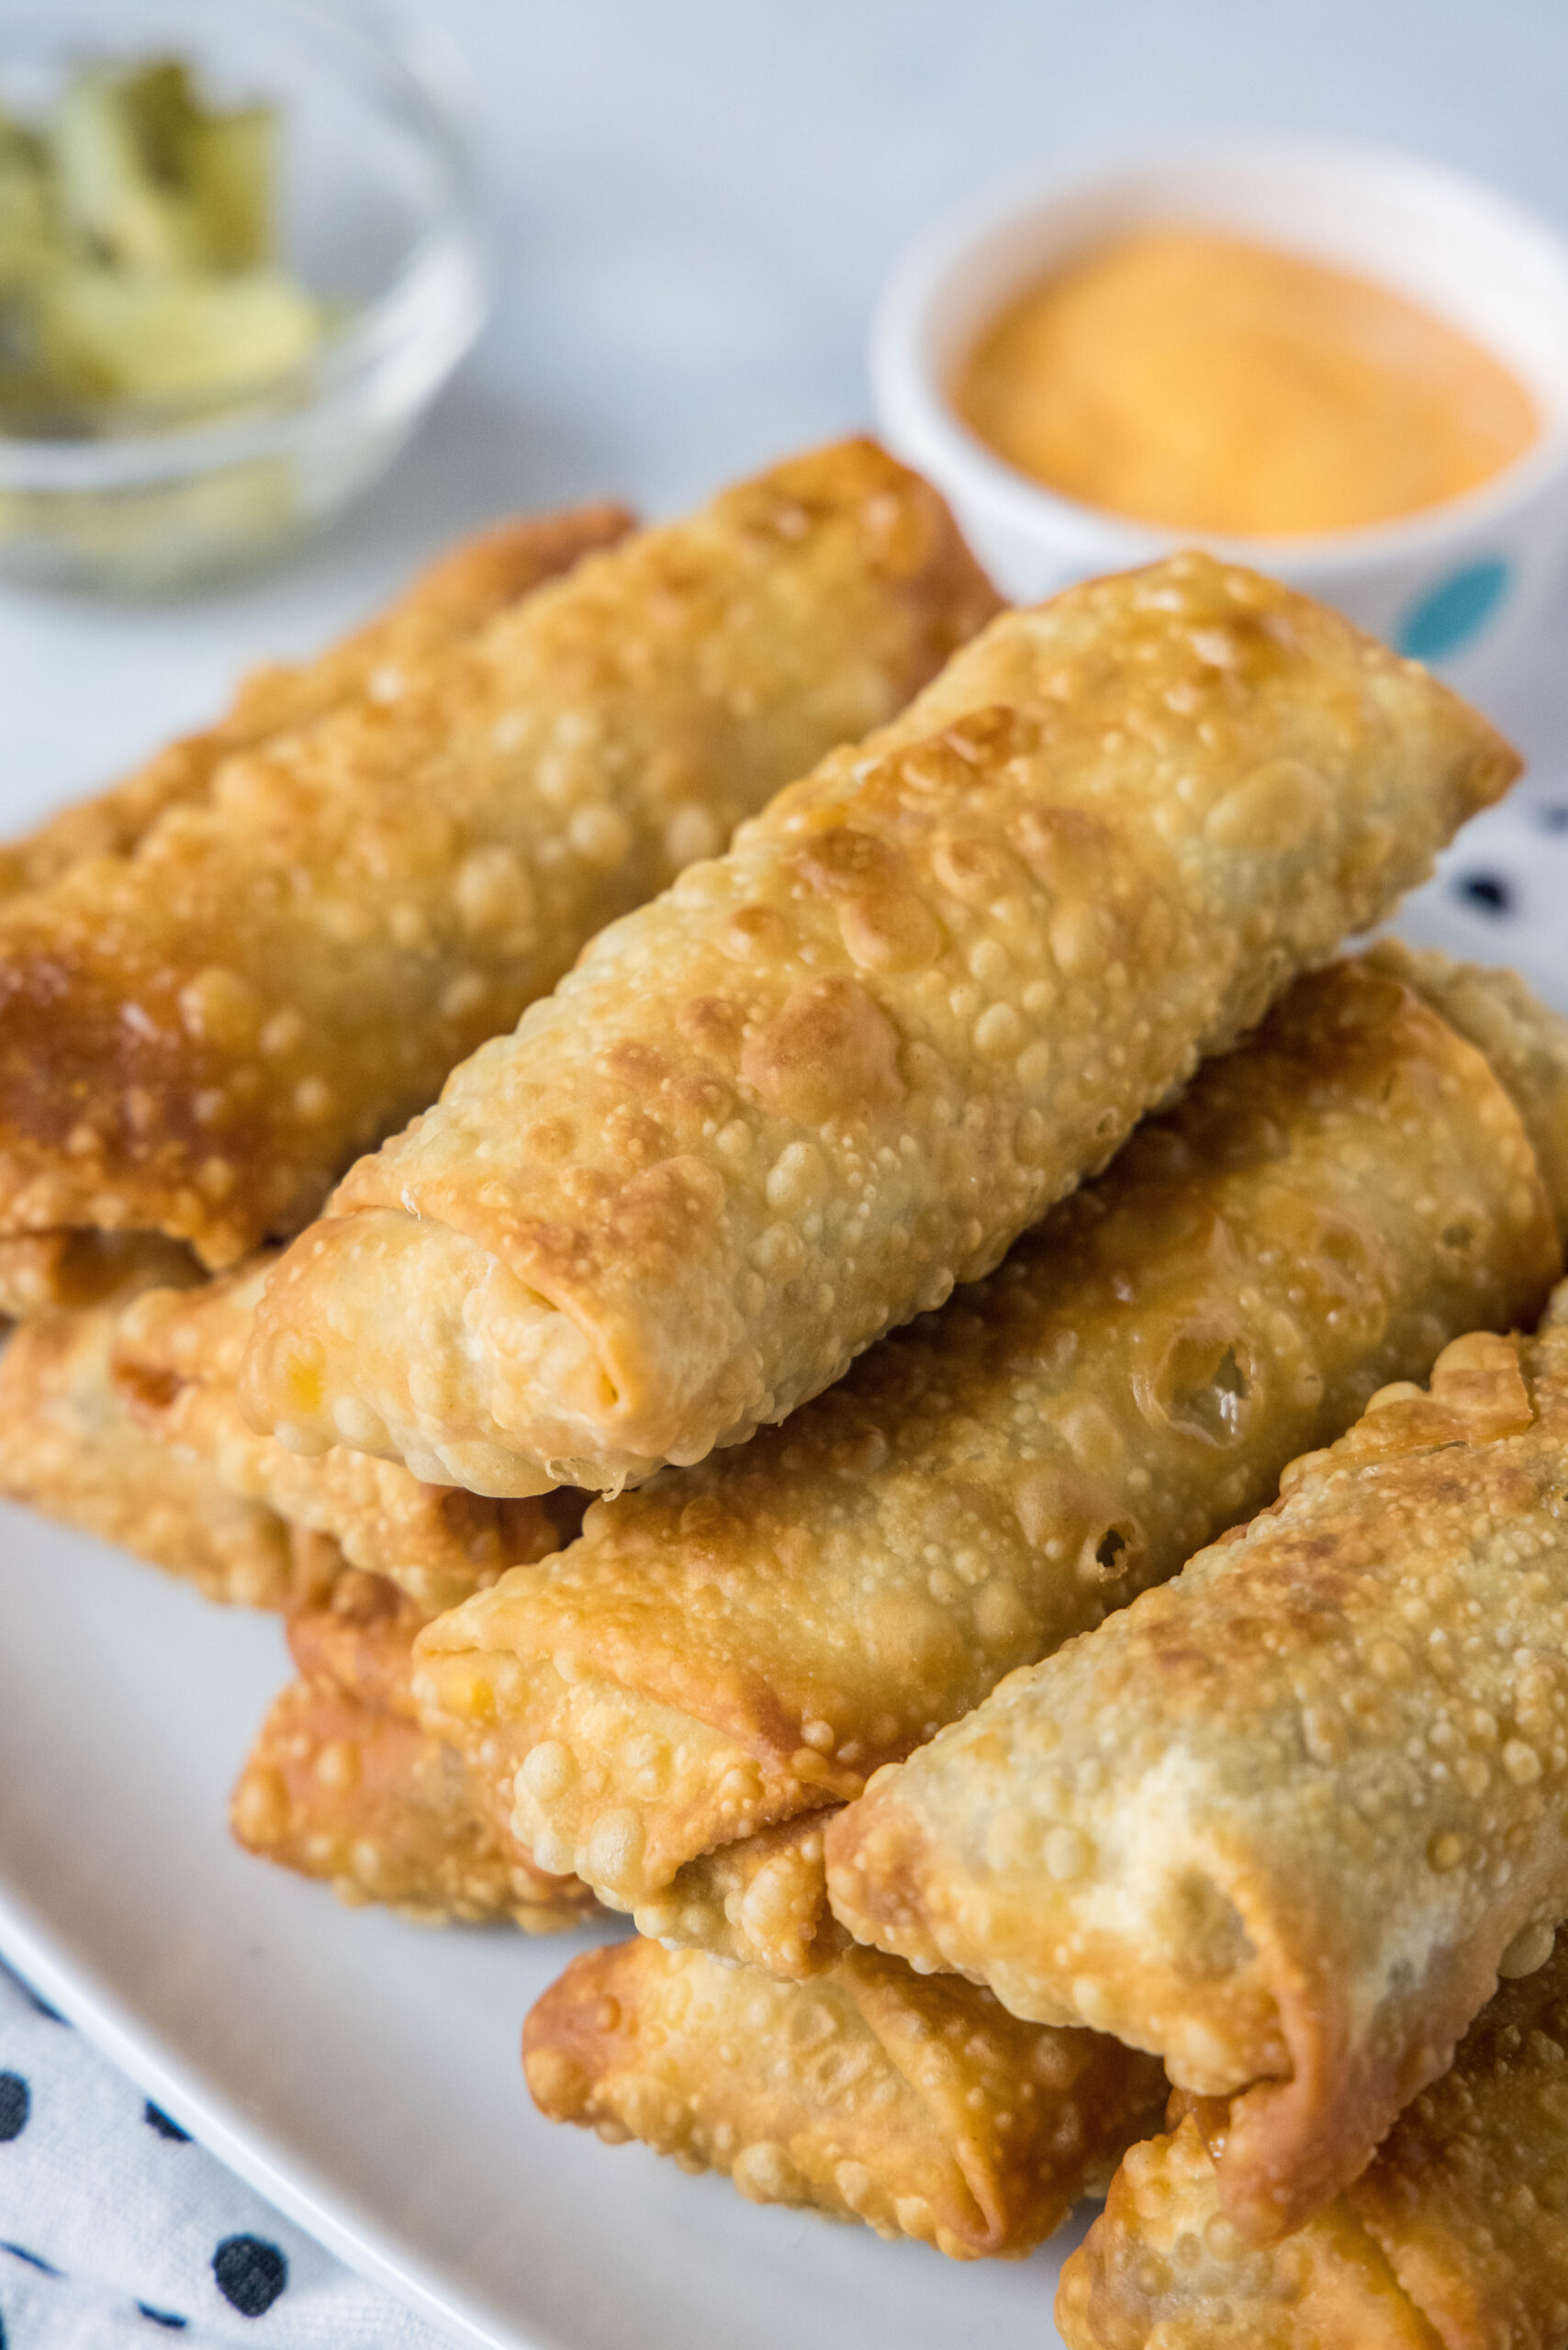 Cheeseburger egg rolls stacked on a platter with a bowl of dipping sauce in the background.